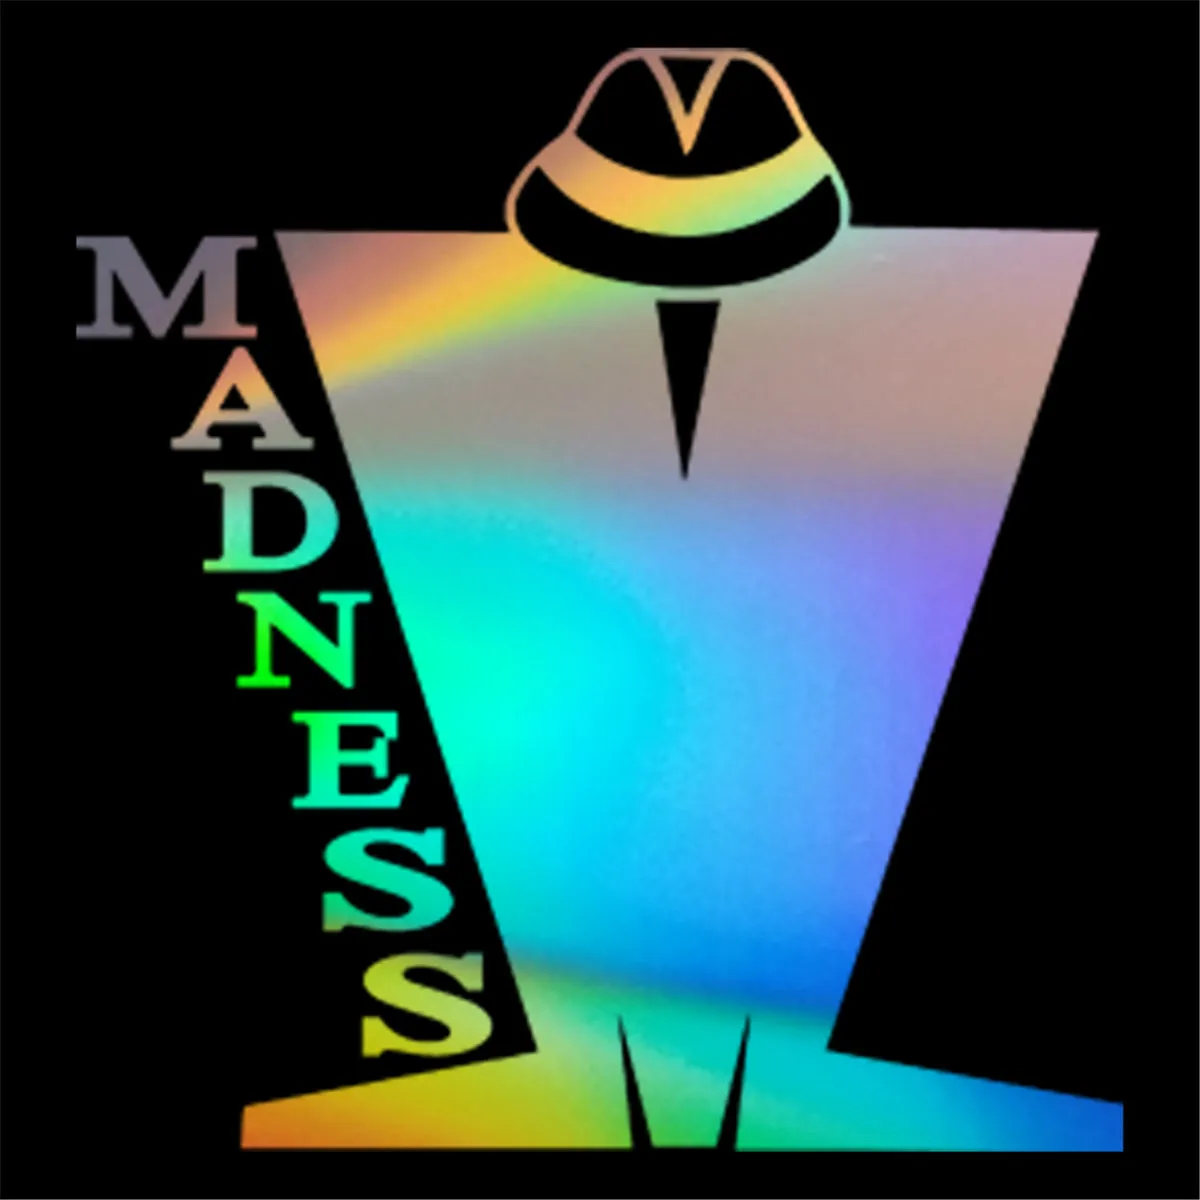 Madness Sign vinyl car sticker decal music band graphic group ska window scooter